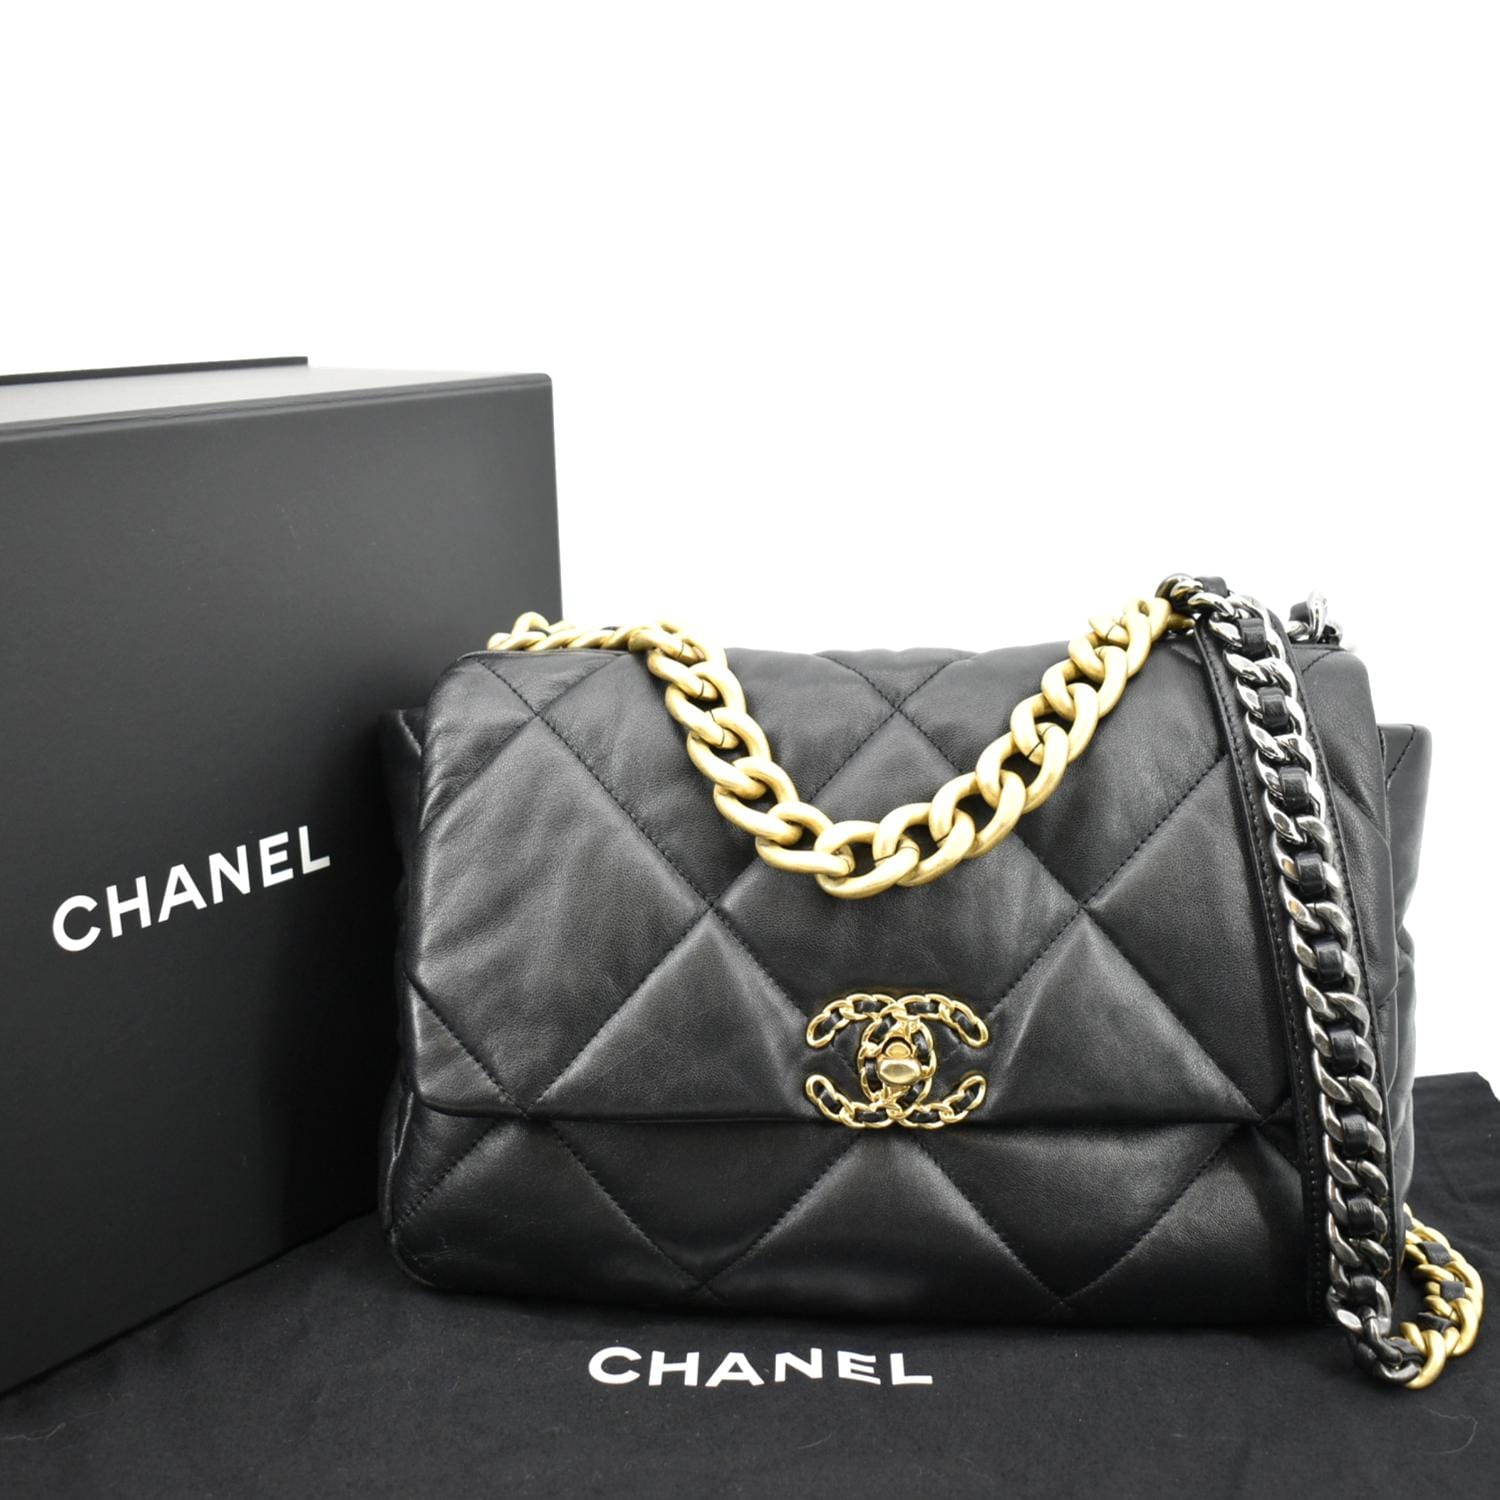 Chanel Black Quilted Lambskin Chanel 19 Large Flap Bag For Sale at